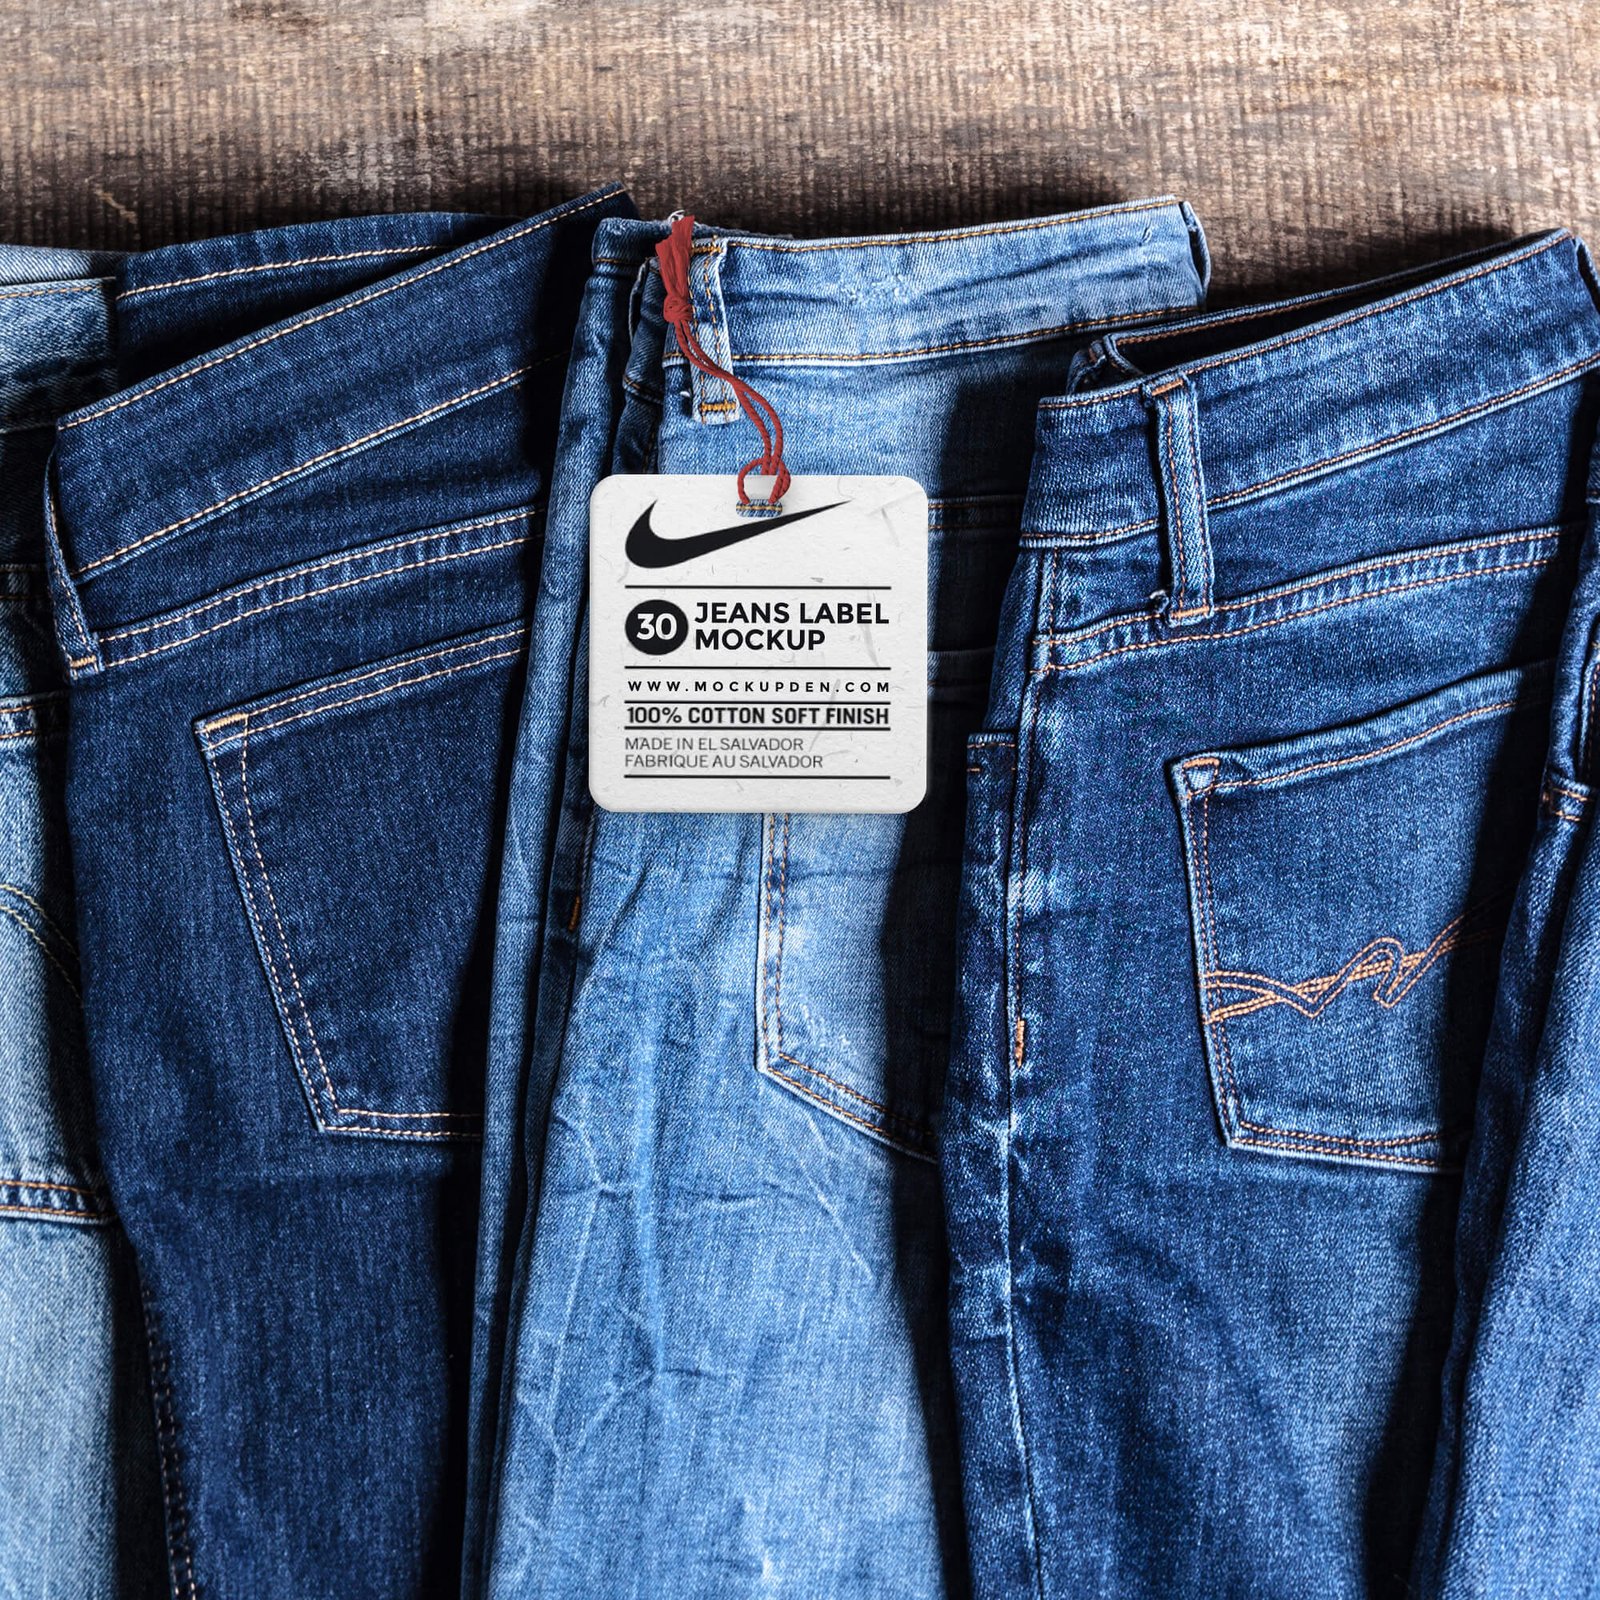 Free Jeans Label Mockup PSD Template